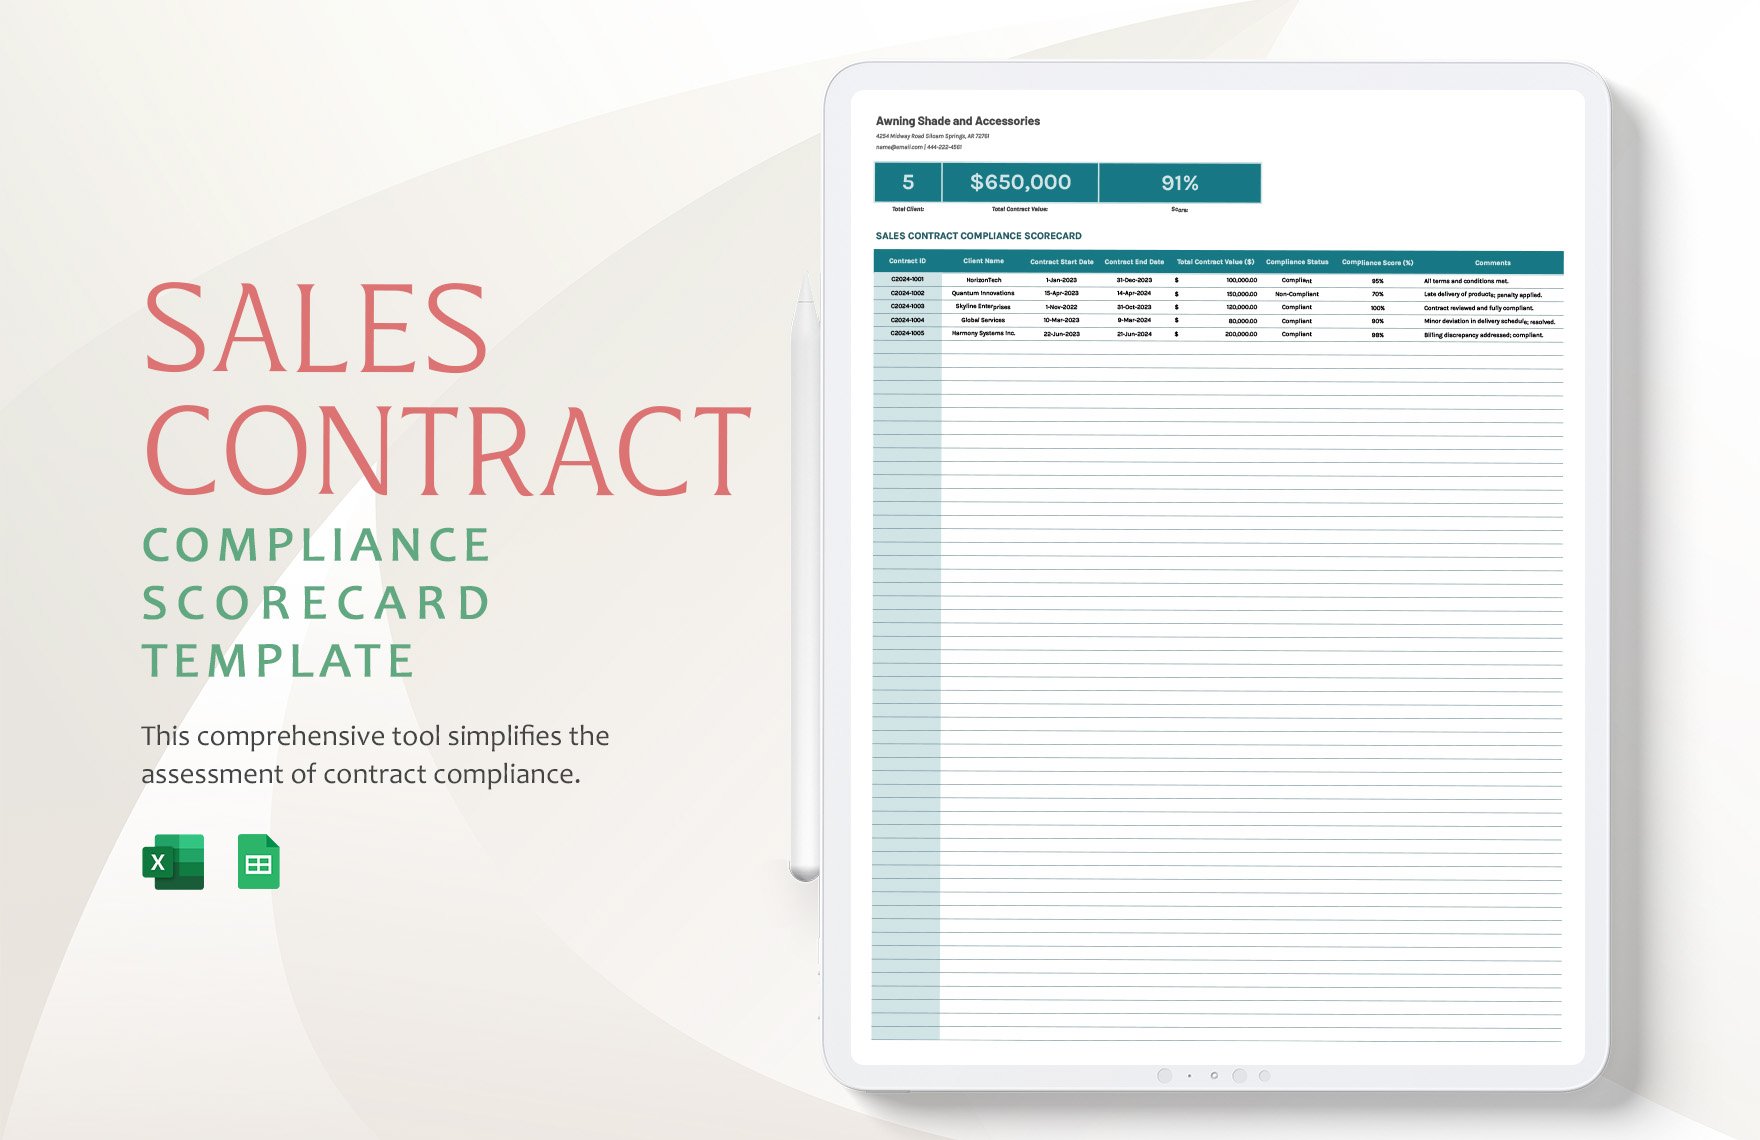 Sales Contract Compliance Scorecard Template in Excel, Google Sheets